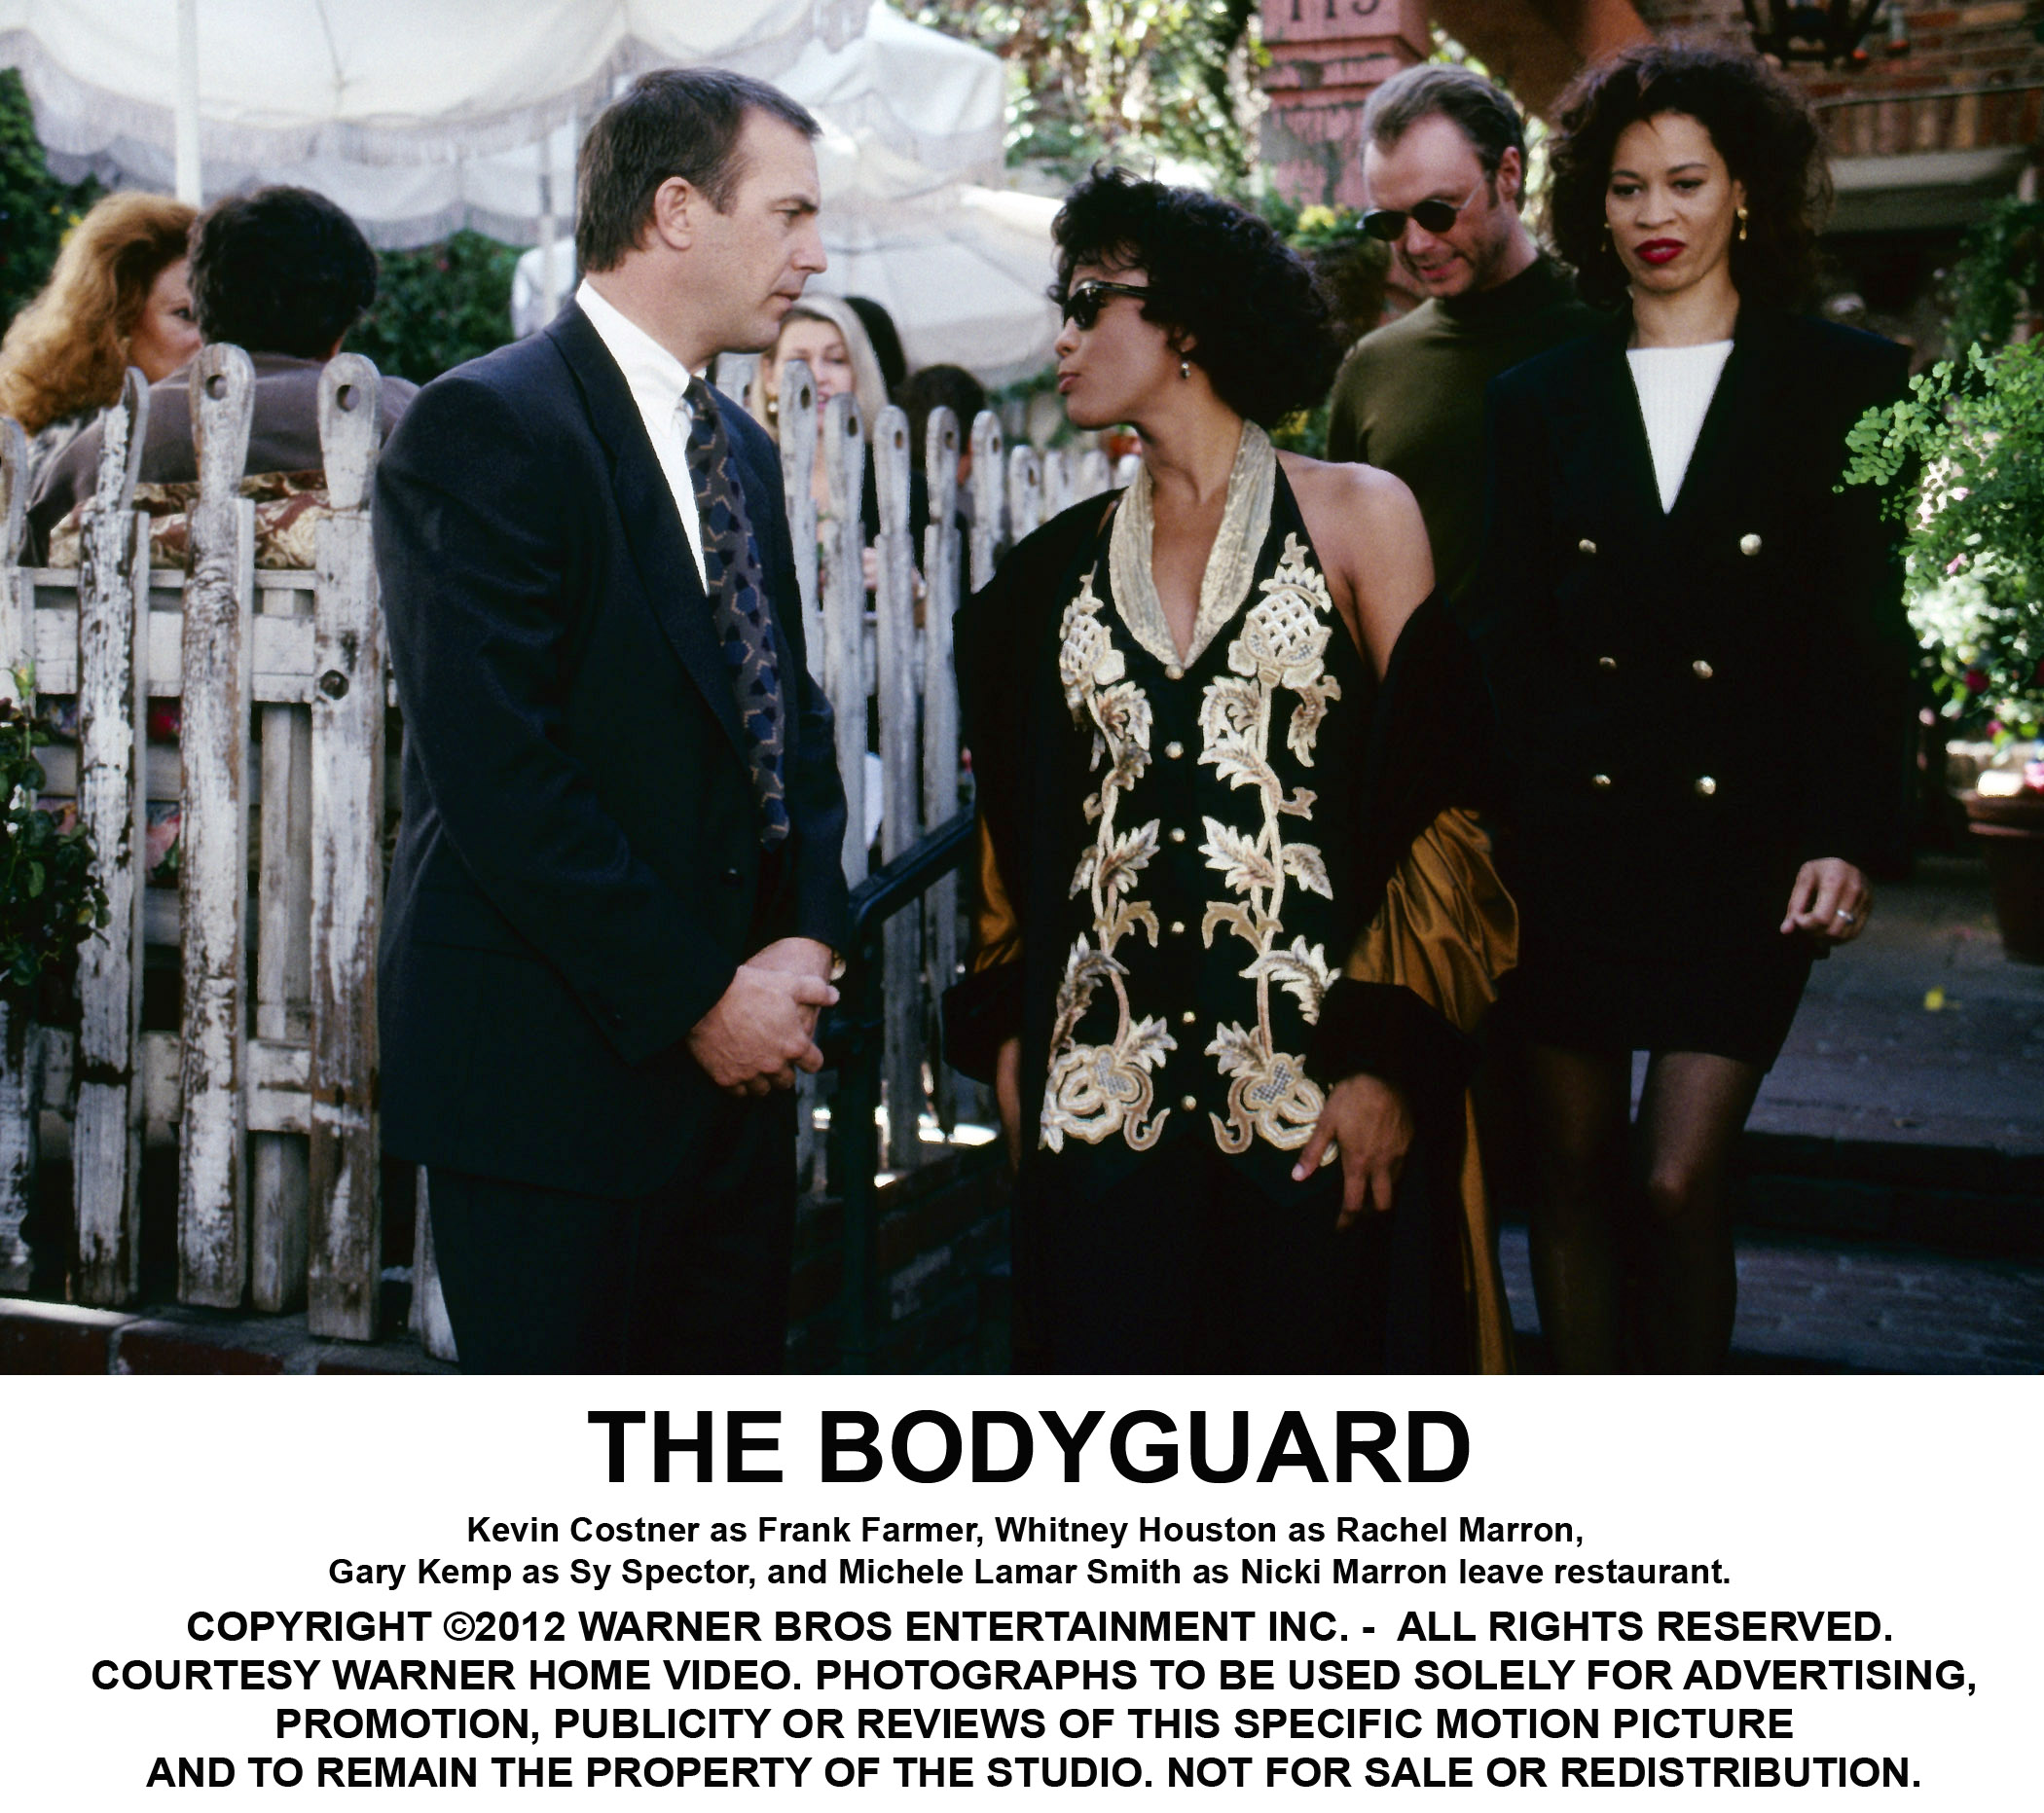 Kevin Costner, Whitney Houston, Gary Kemp, and Michele Lamar Richards in The Bodyguard (1992)